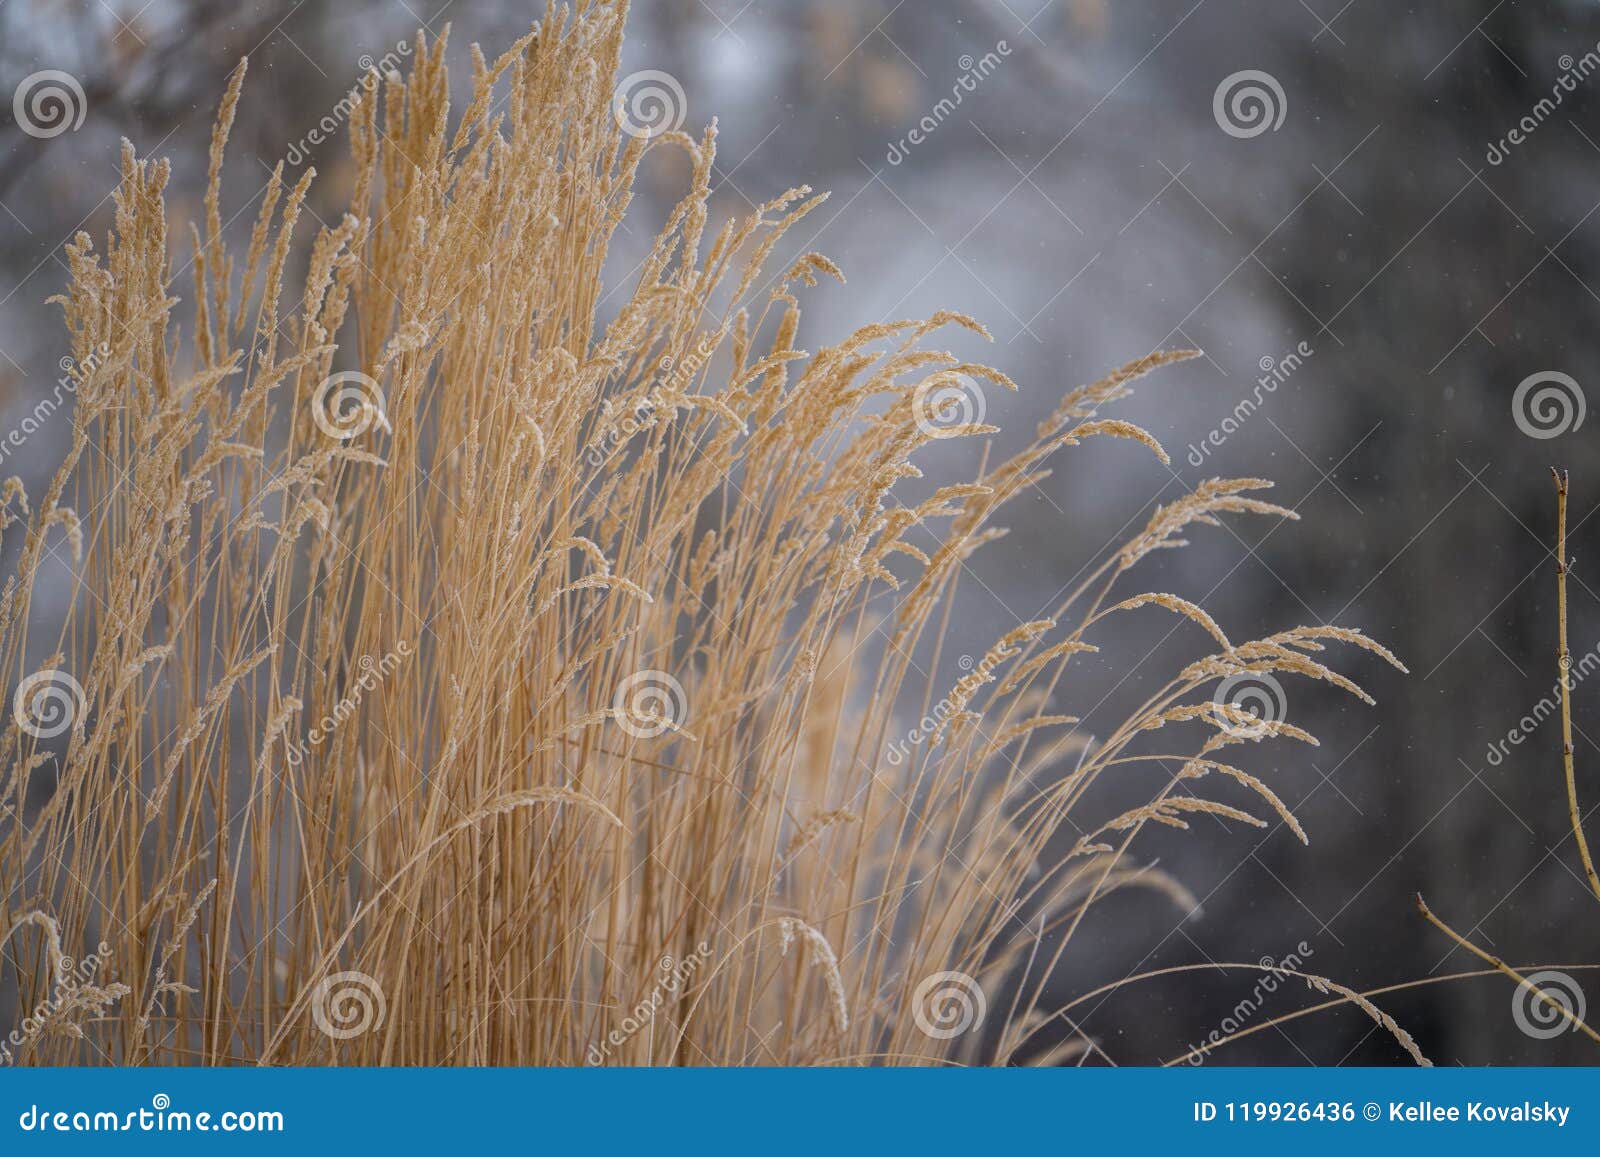 Golden Grasses In A Dull Gray Winter Landscape. Stock Photo - Image of ...